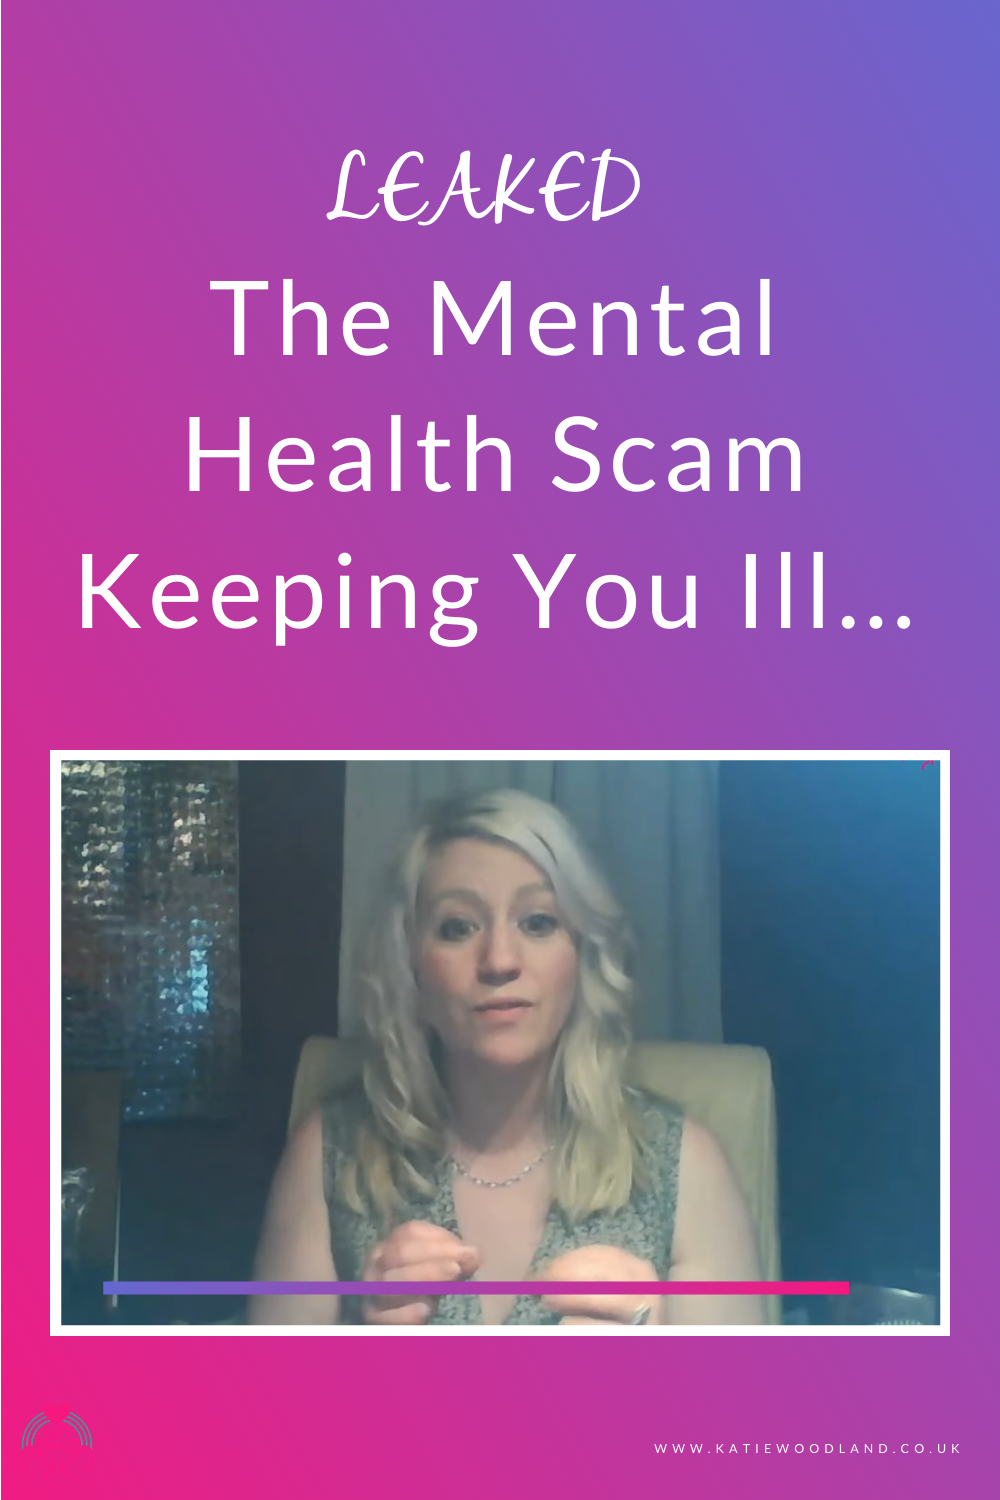 Leaked: The Mental Health Scam Keeping You Ill...